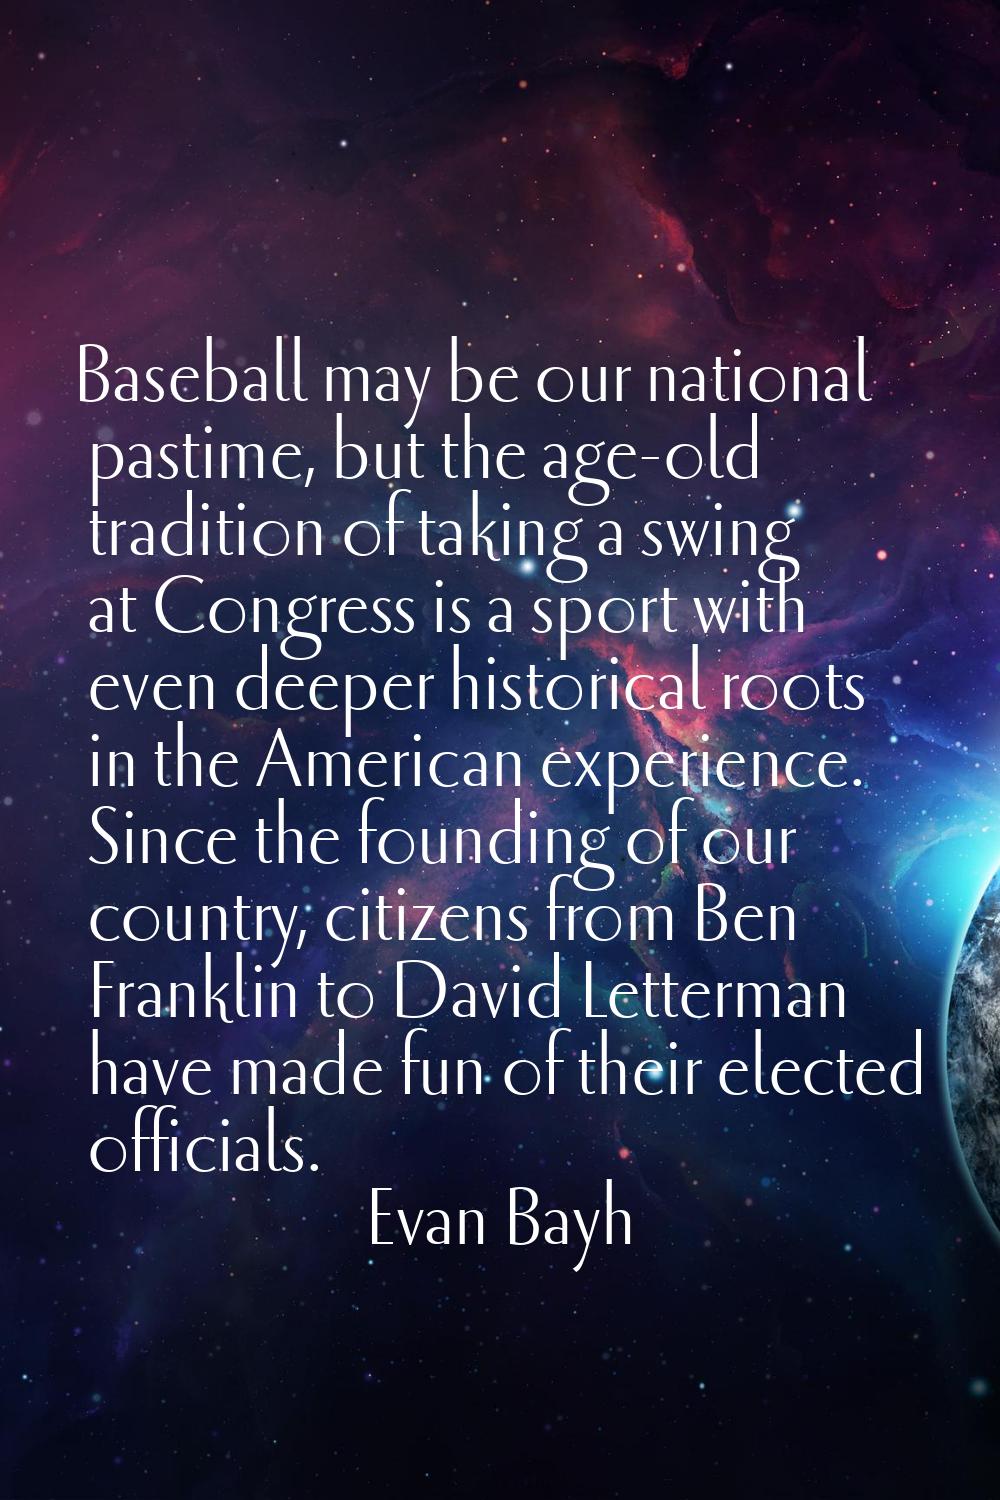 Baseball may be our national pastime, but the age-old tradition of taking a swing at Congress is a 